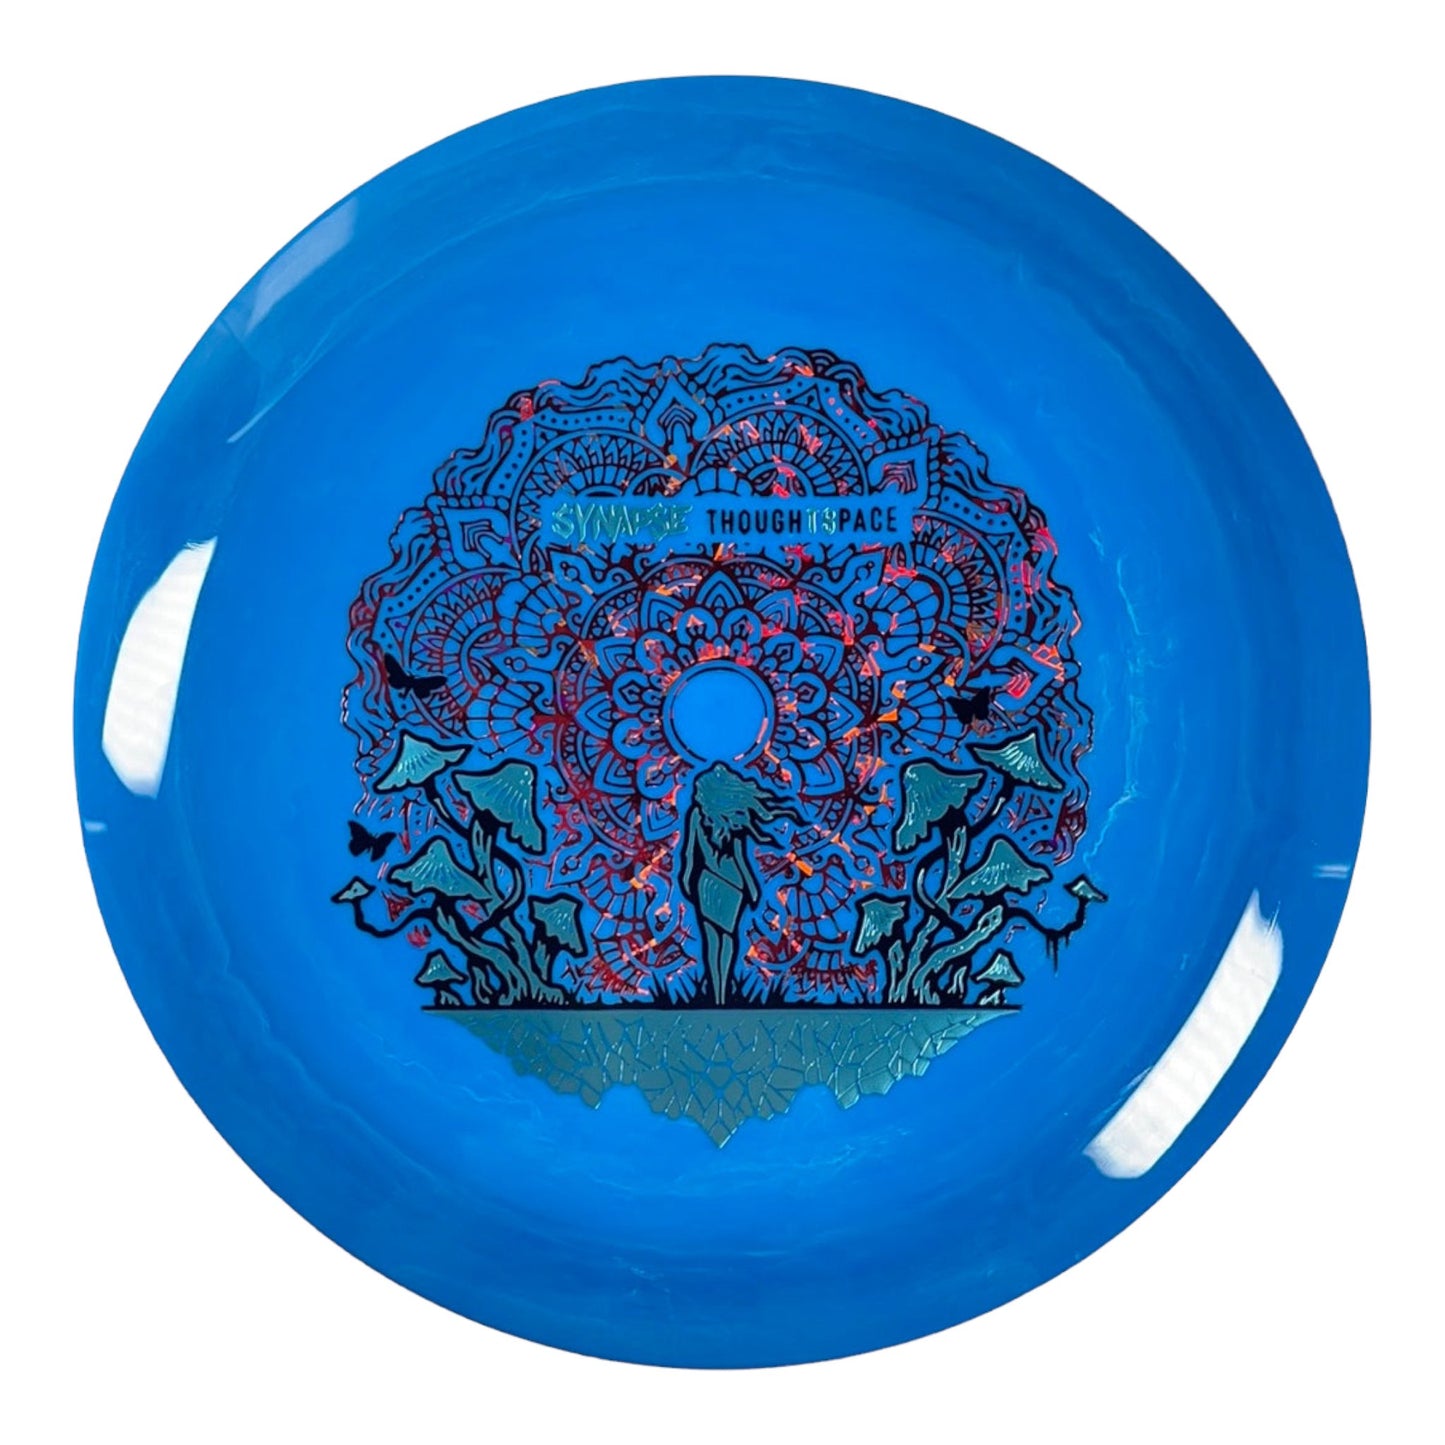 Thought Space Athletics Synapse | Aura | Blue/Red 175g Disc Golf